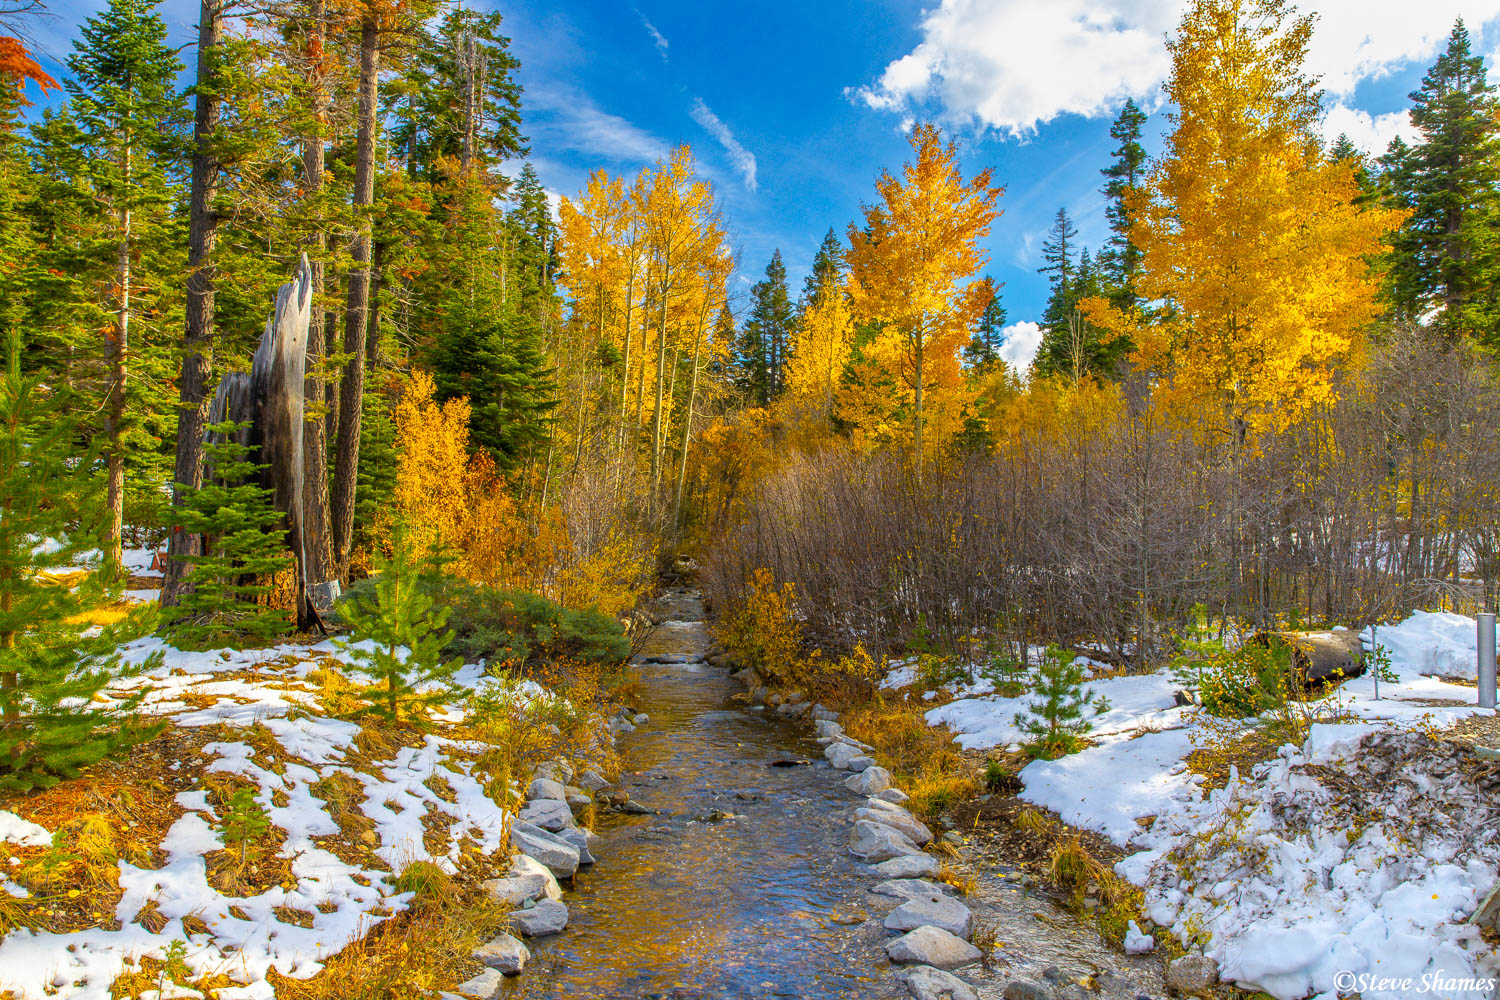 I saw this nice colorful winter scene on Fallen Leaf Road, right next to Lake Tahoe.